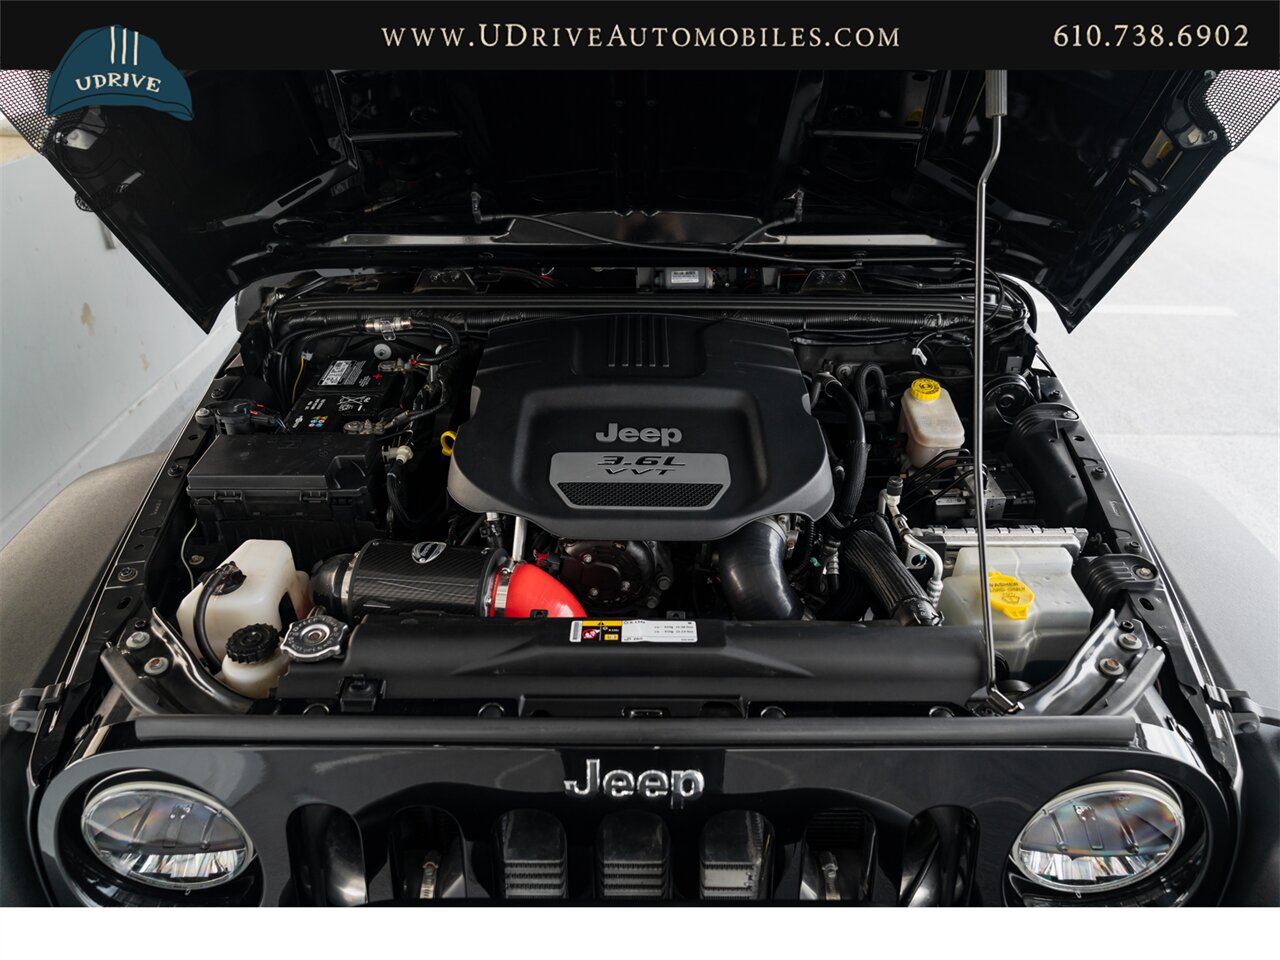 2013 Jeep Wrangler Sport  RIPP Vortech Supercharger System 6 Speed Manual 7k Miles - Photo 49 - West Chester, PA 19382